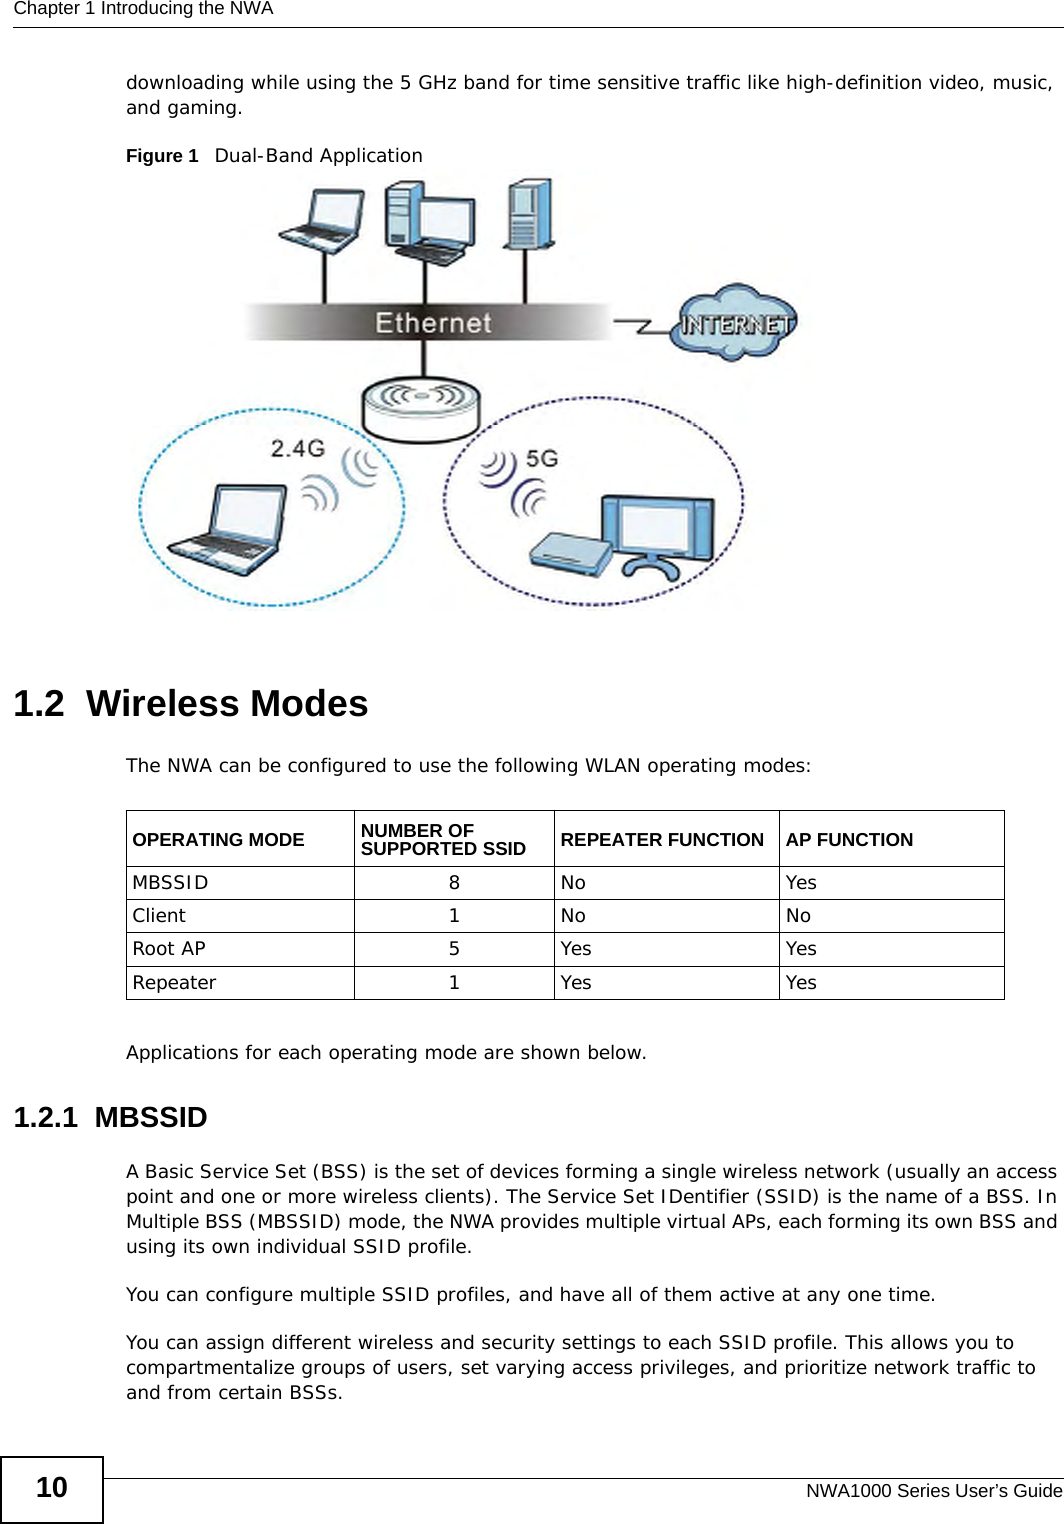 Chapter 1 Introducing the NWANWA1000 Series User’s Guide10downloading while using the 5 GHz band for time sensitive traffic like high-definition video, music, and gaming. Figure 1   Dual-Band Application 1.2  Wireless ModesThe NWA can be configured to use the following WLAN operating modes:Applications for each operating mode are shown below.1.2.1  MBSSIDA Basic Service Set (BSS) is the set of devices forming a single wireless network (usually an access point and one or more wireless clients). The Service Set IDentifier (SSID) is the name of a BSS. In Multiple BSS (MBSSID) mode, the NWA provides multiple virtual APs, each forming its own BSS and using its own individual SSID profile.You can configure multiple SSID profiles, and have all of them active at any one time.You can assign different wireless and security settings to each SSID profile. This allows you to compartmentalize groups of users, set varying access privileges, and prioritize network traffic to and from certain BSSs.OPERATING MODE NUMBER OF SUPPORTED SSID REPEATER FUNCTION AP FUNCTIONMBSSID 8 No YesClient 1 No NoRoot AP 5 Yes YesRepeater 1 Yes Yes